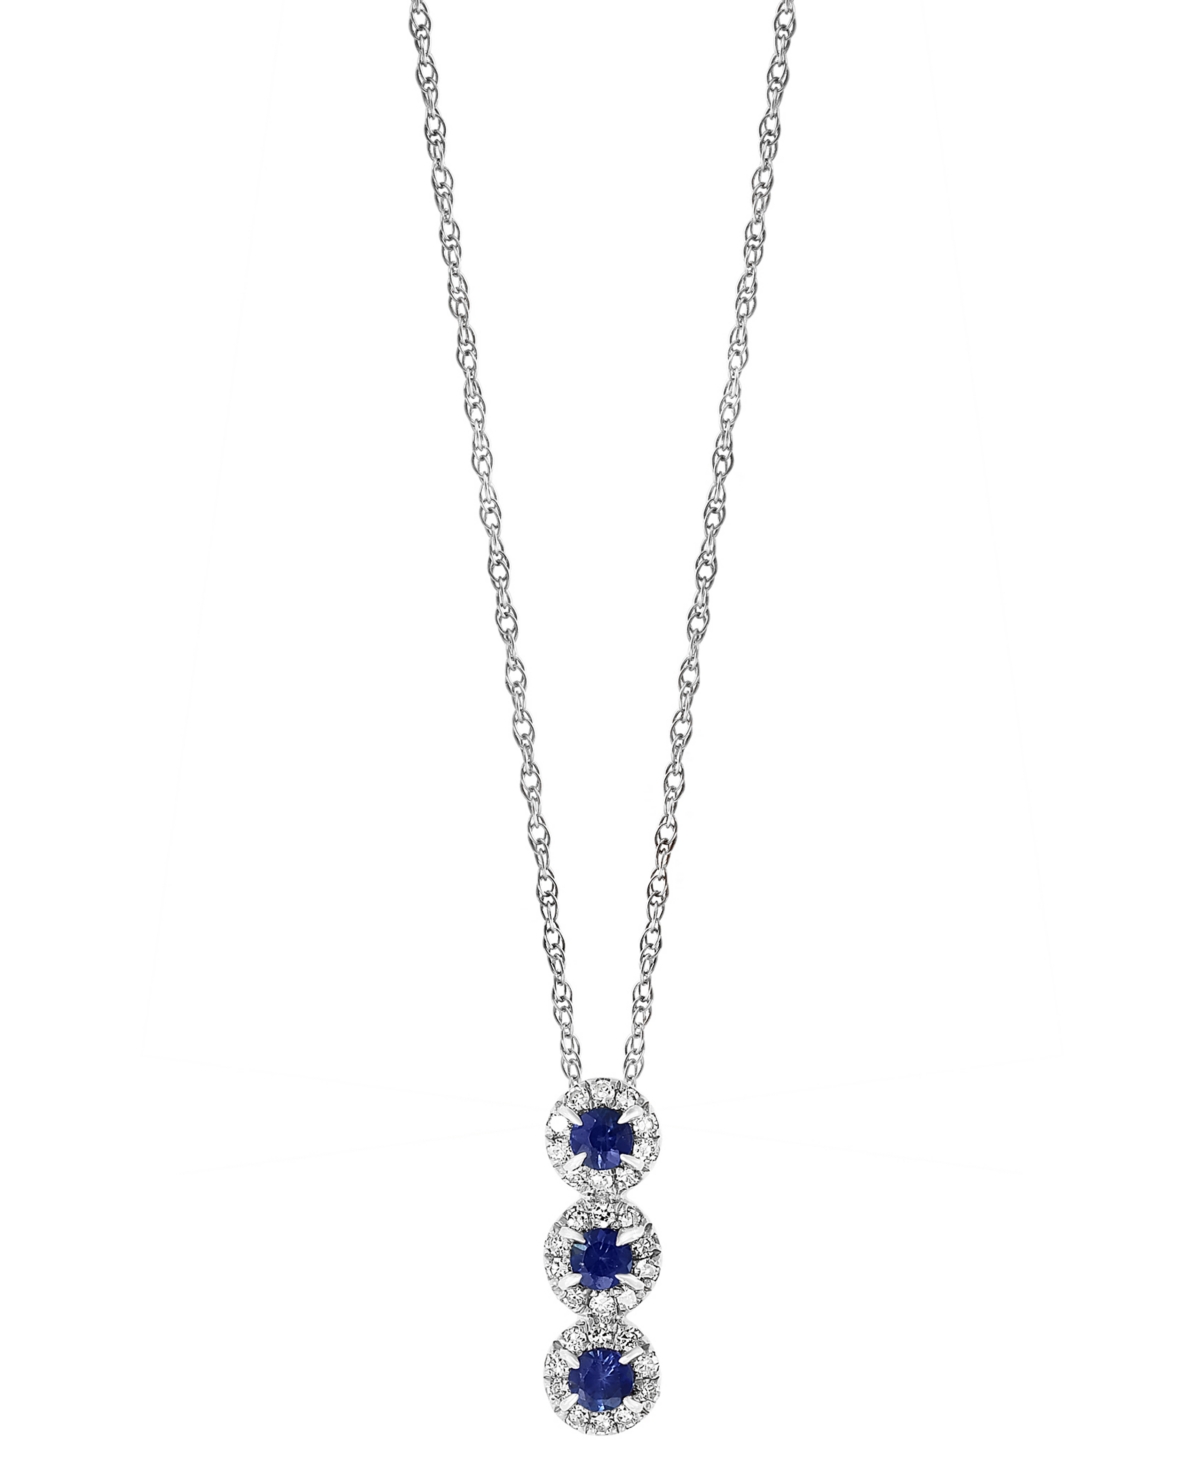 Lali Jewels Sapphire (1/6 ct. t.w.) & Diamond (1/10 ct. t.w.) 18" Pendant Necklace in 14k Rose Gold